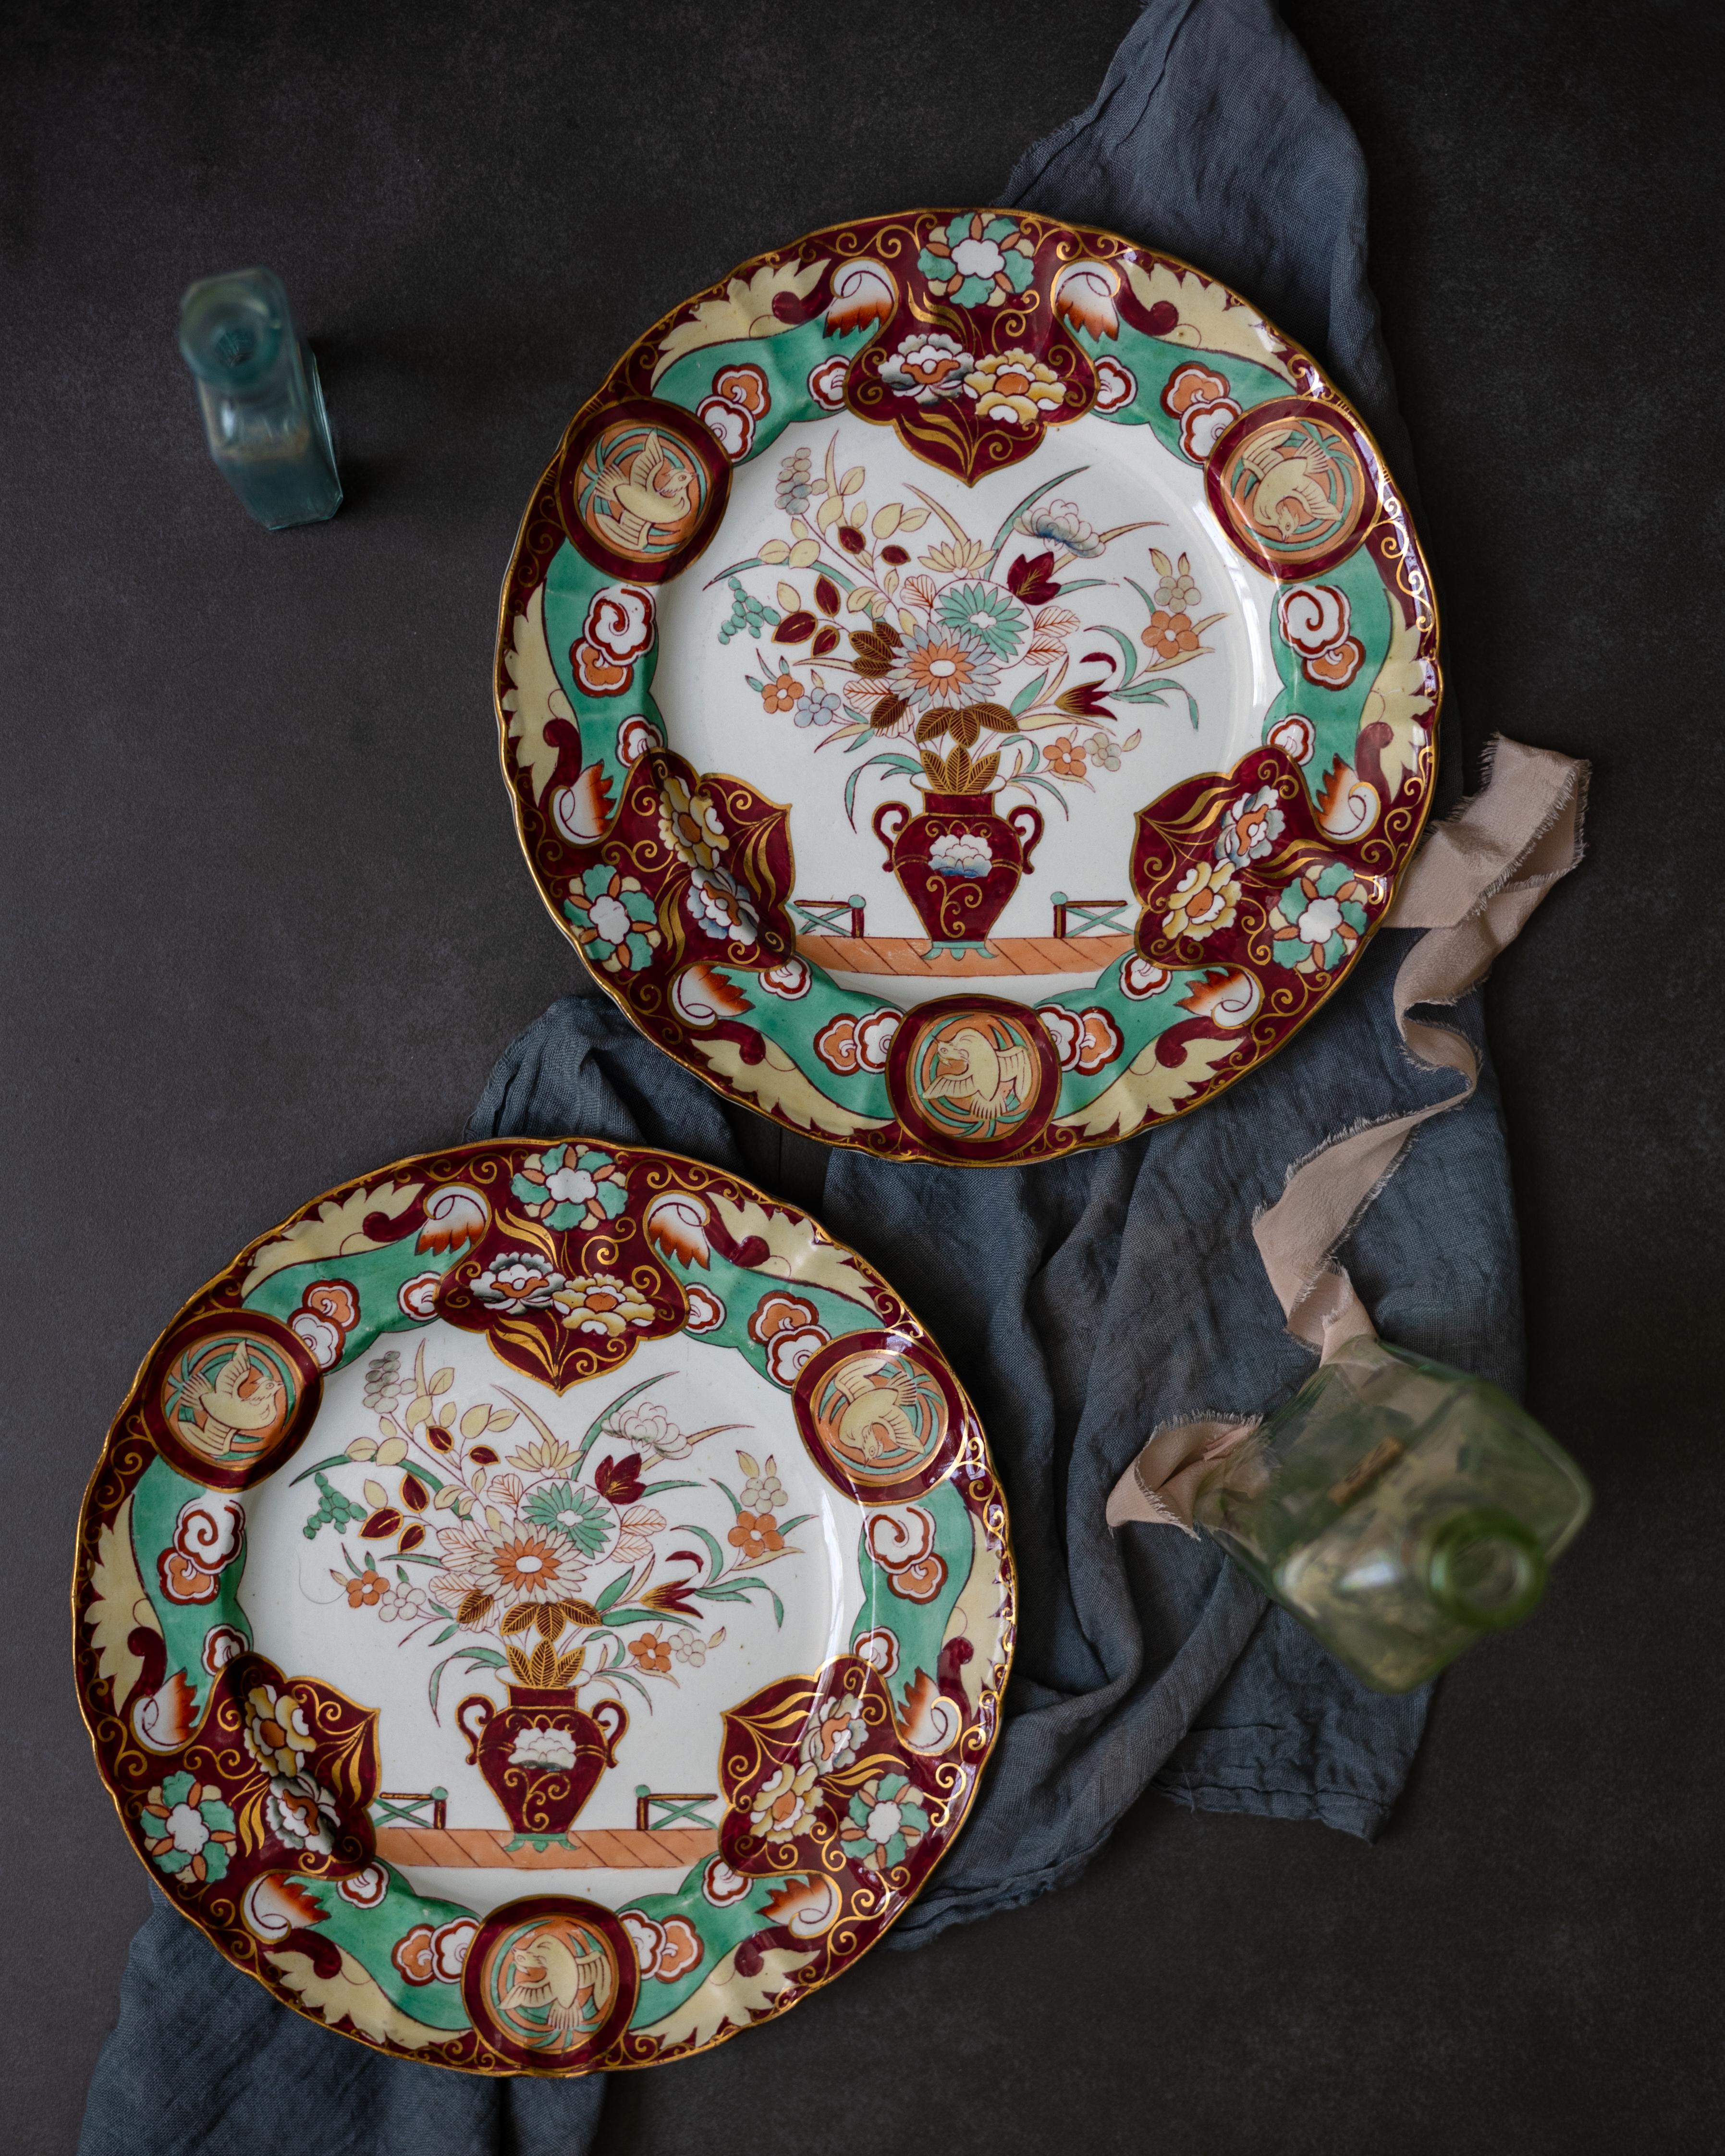 A pair of Mason’s ironstone dishes decorated in the Regency chinoiserie style, circa 1860. The plates’ pattern, Fence Vase Doves, is rendered in maroon, mint green, and buff.

Mason’s Patent Ironstone China was introduced in 1813 as a less